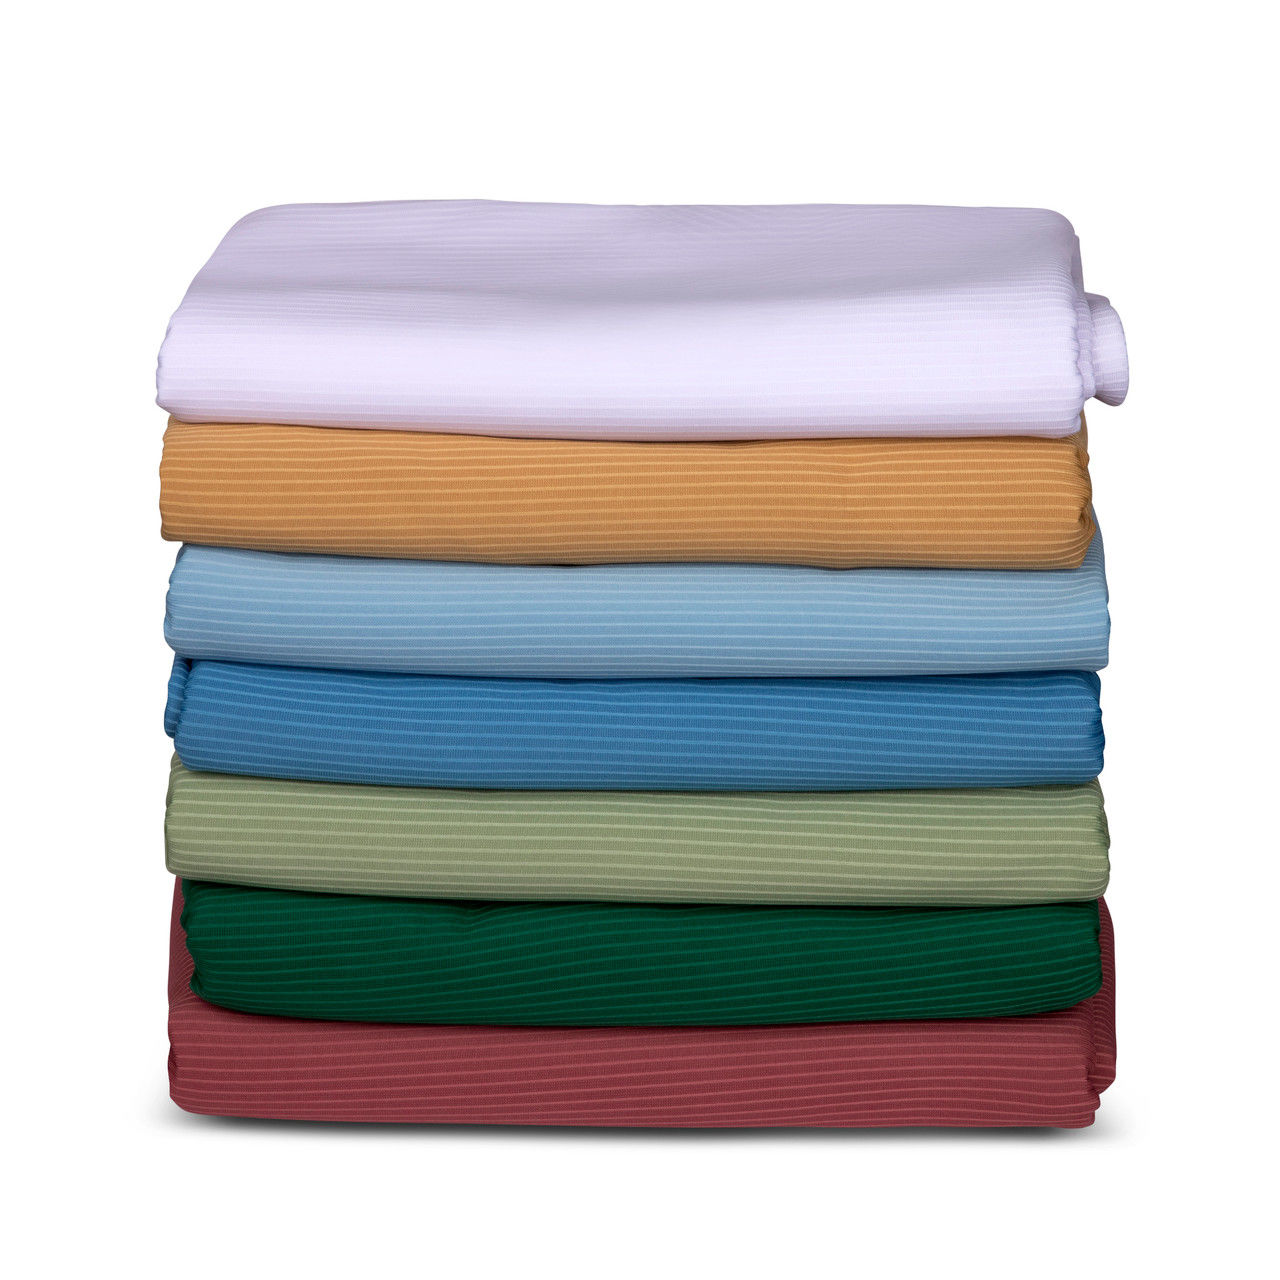 What design does the ribcord bedspread twin from Concord Ribcord feature?